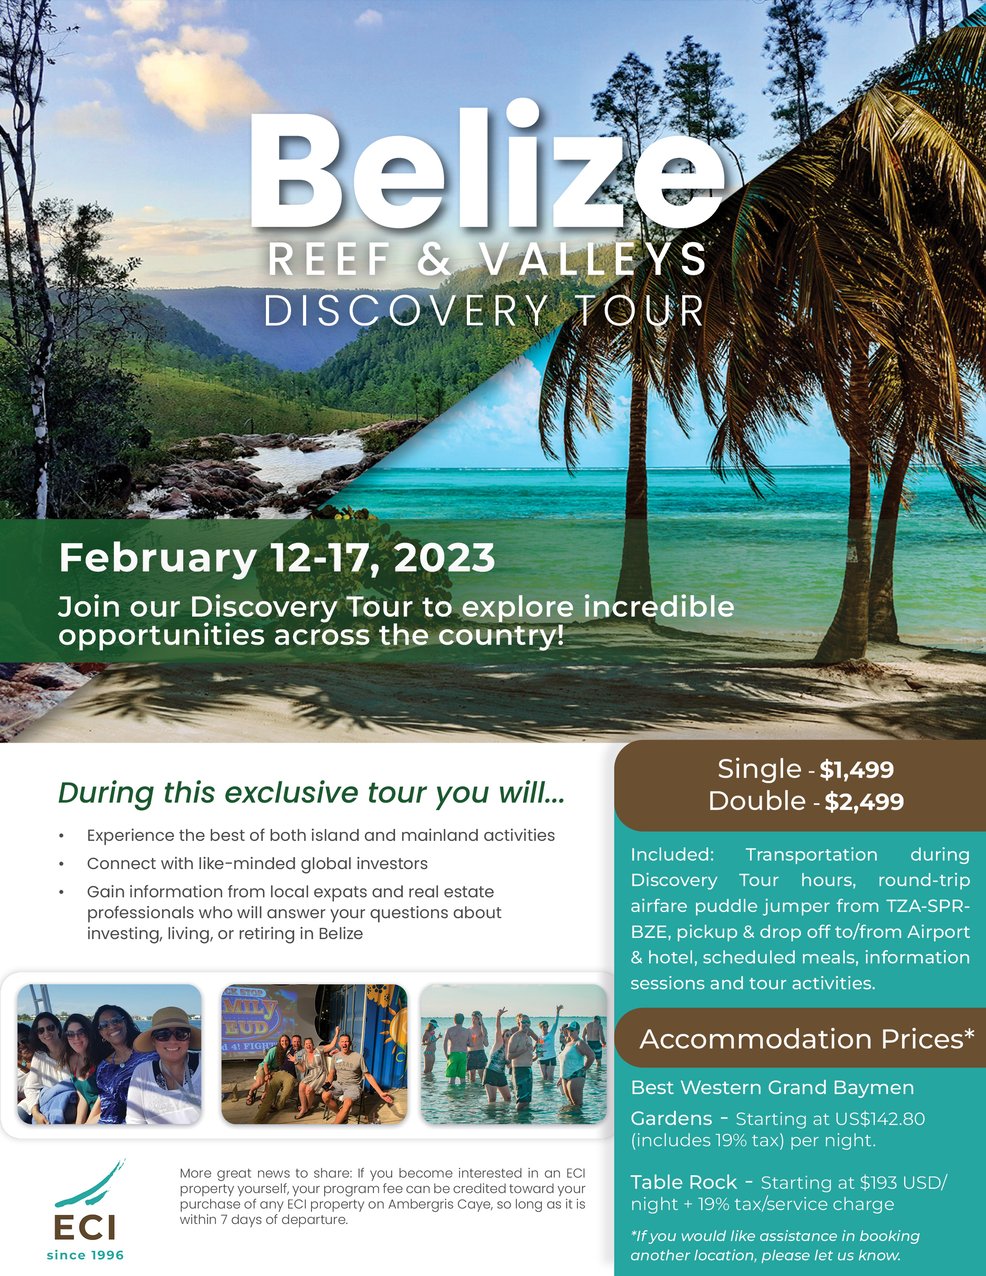 Belize - Discovery Tours